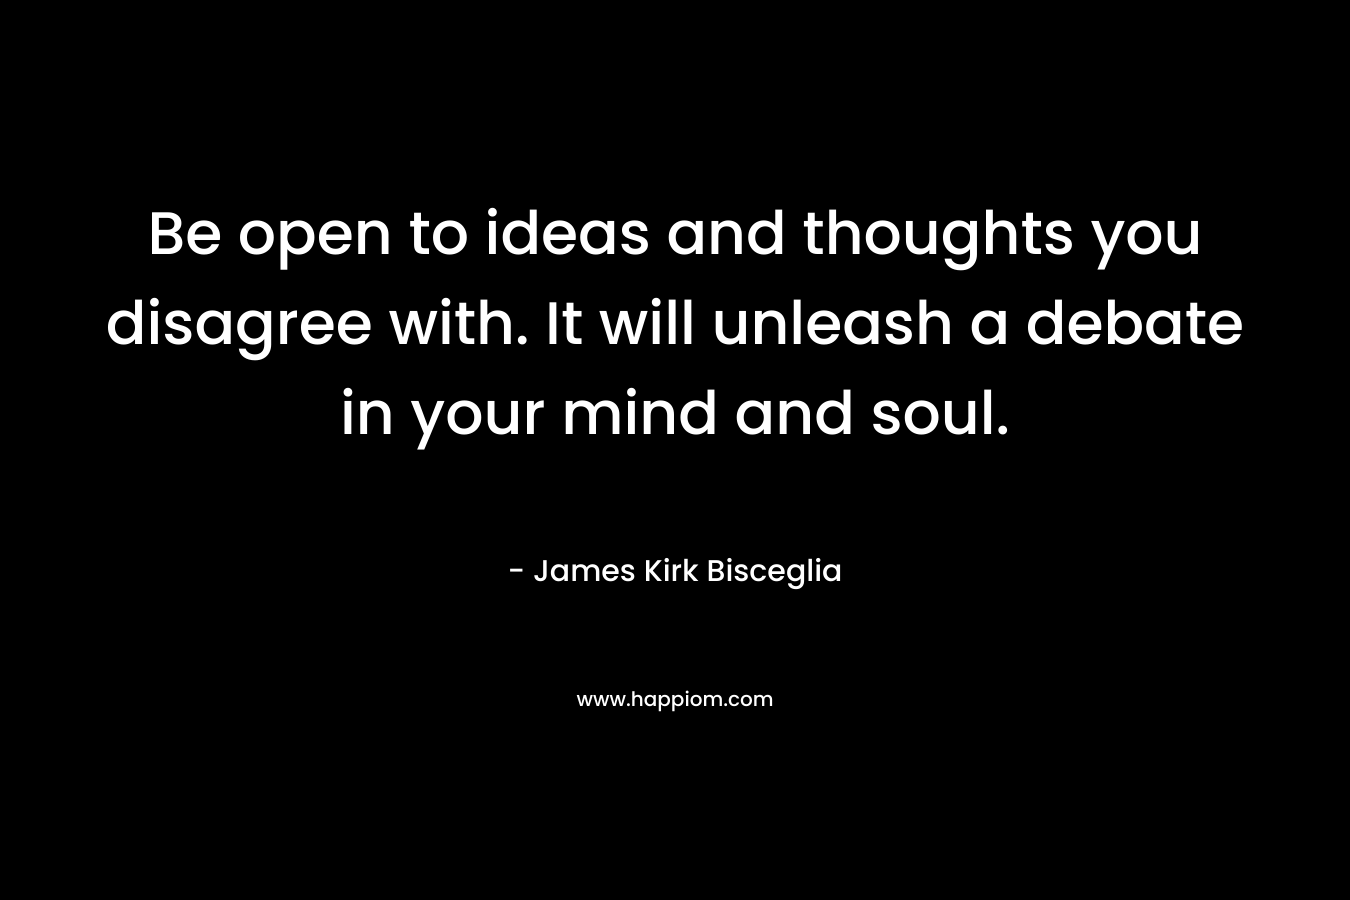 Be open to ideas and thoughts you disagree with. It will unleash a debate in your mind and soul. – James Kirk Bisceglia